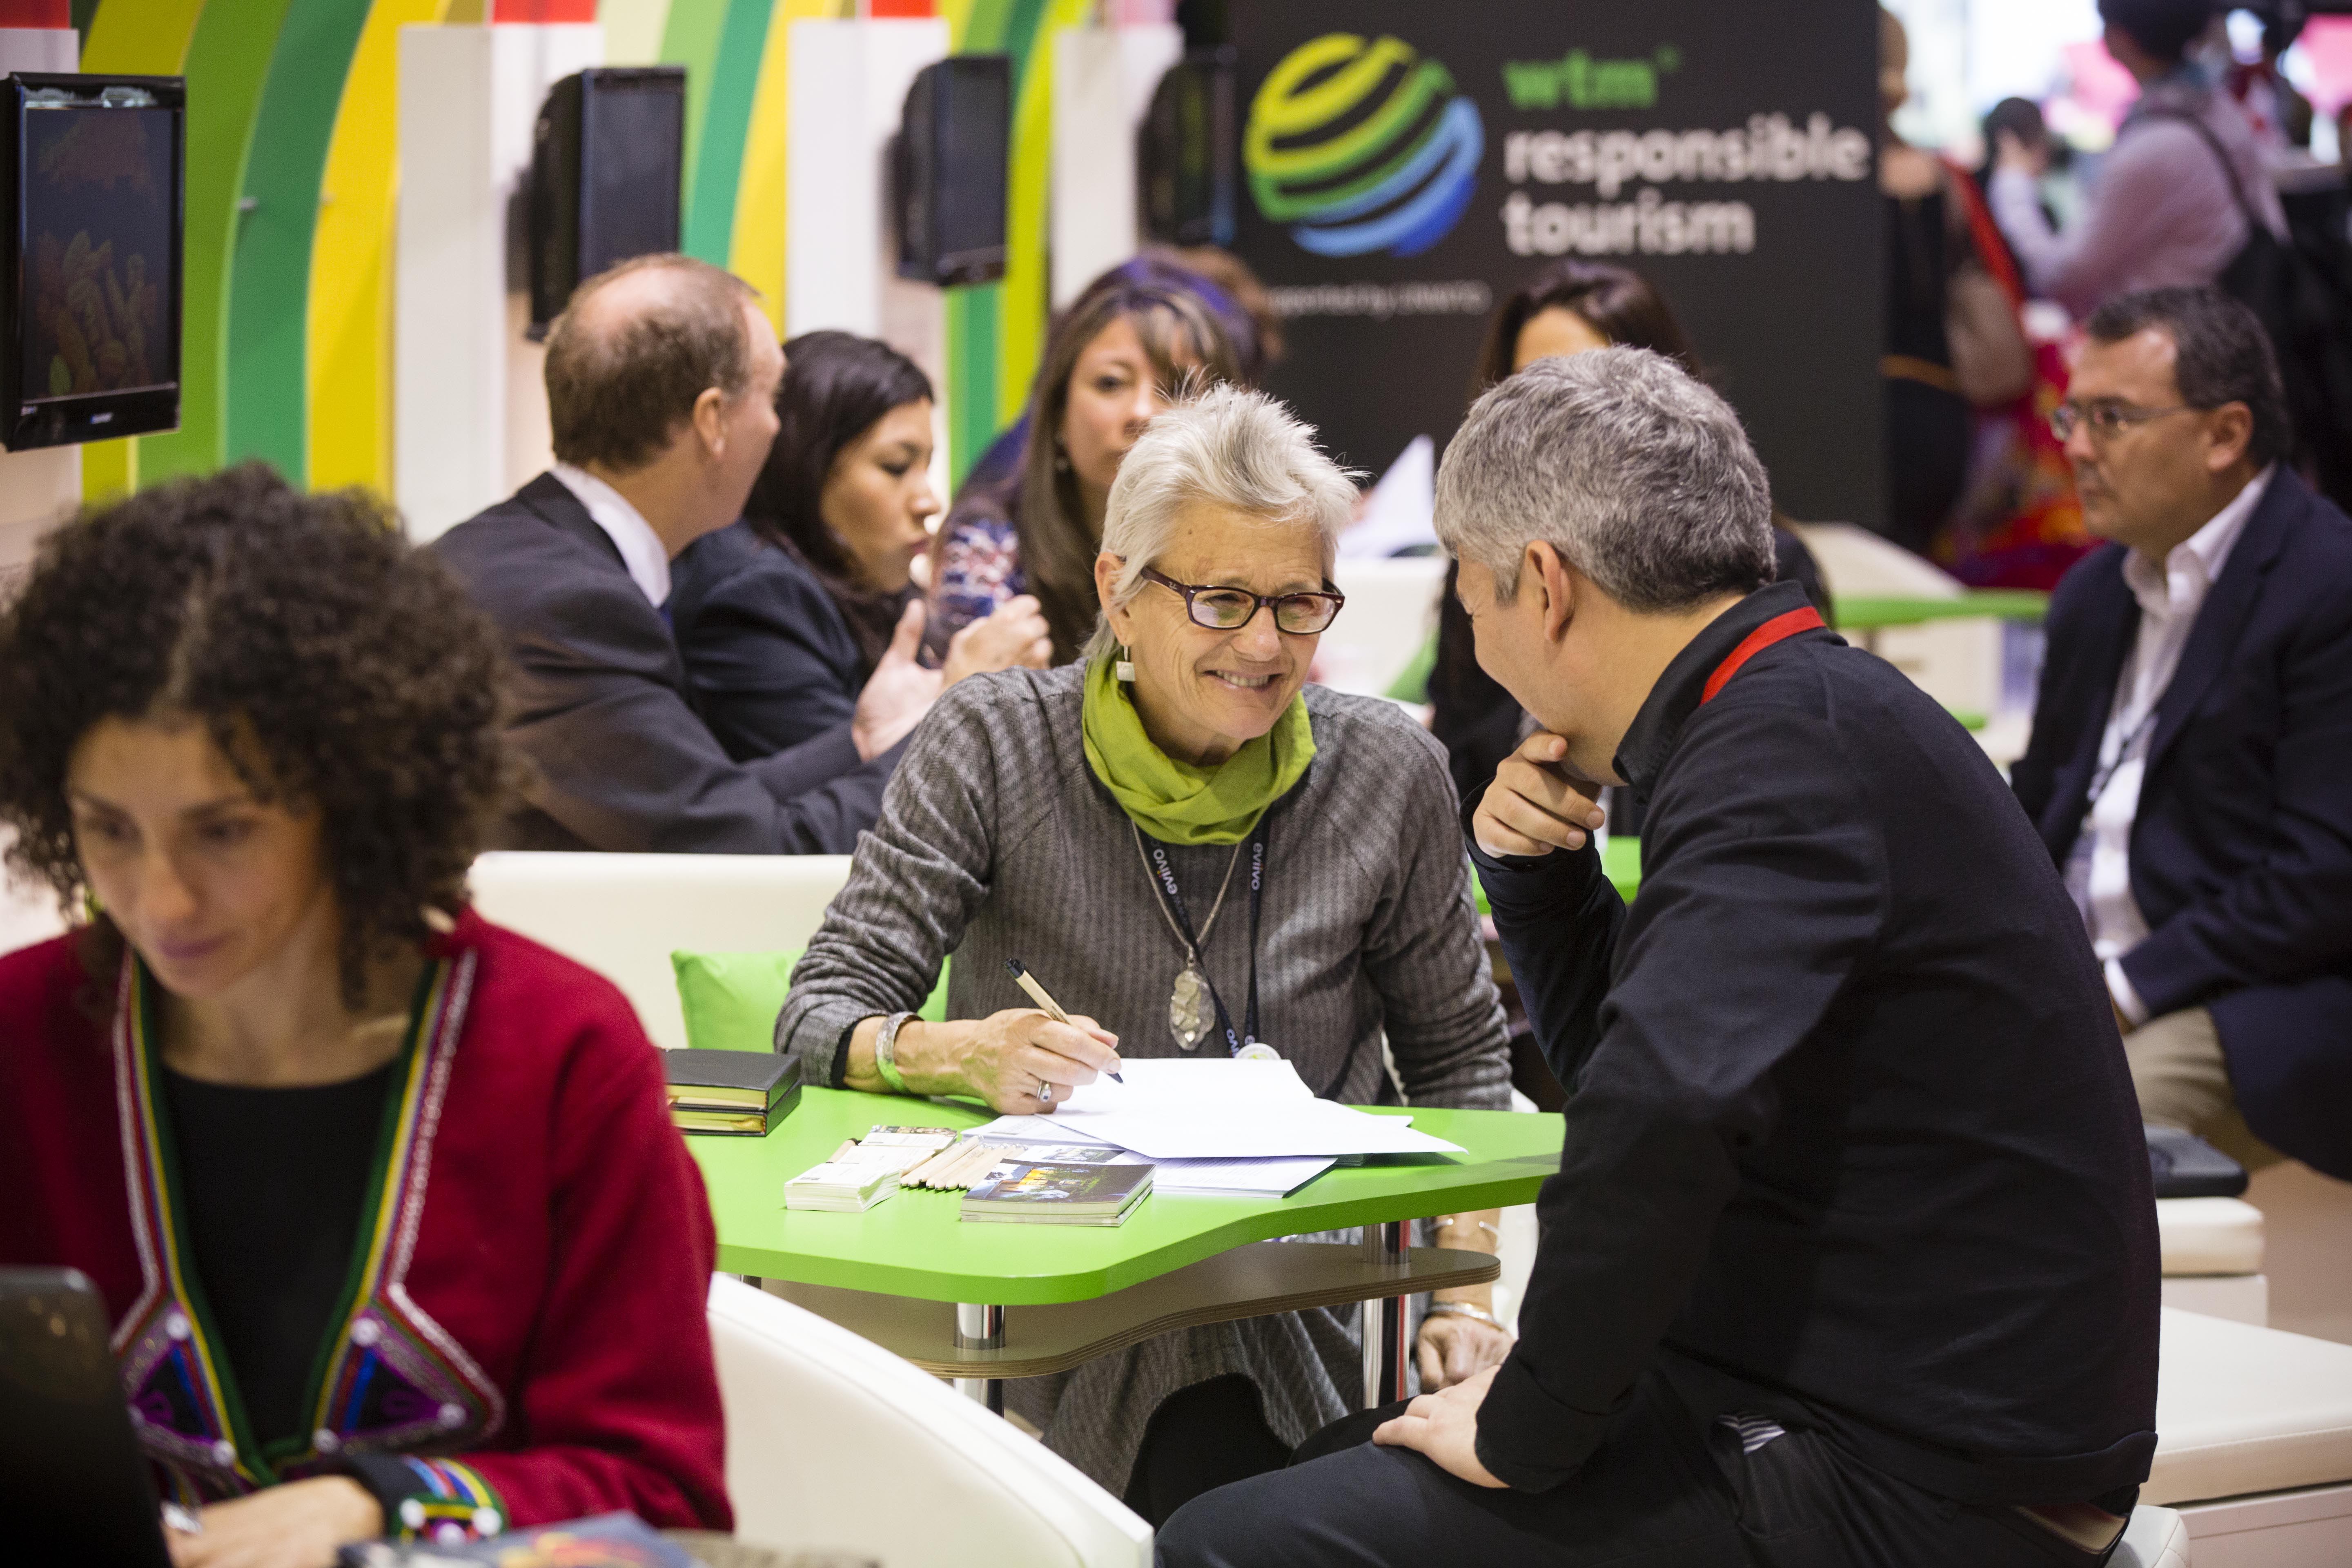 World Responsible Tourism Awards at WTM reveal their widest reach yet with the announcement of the 2015 longlist